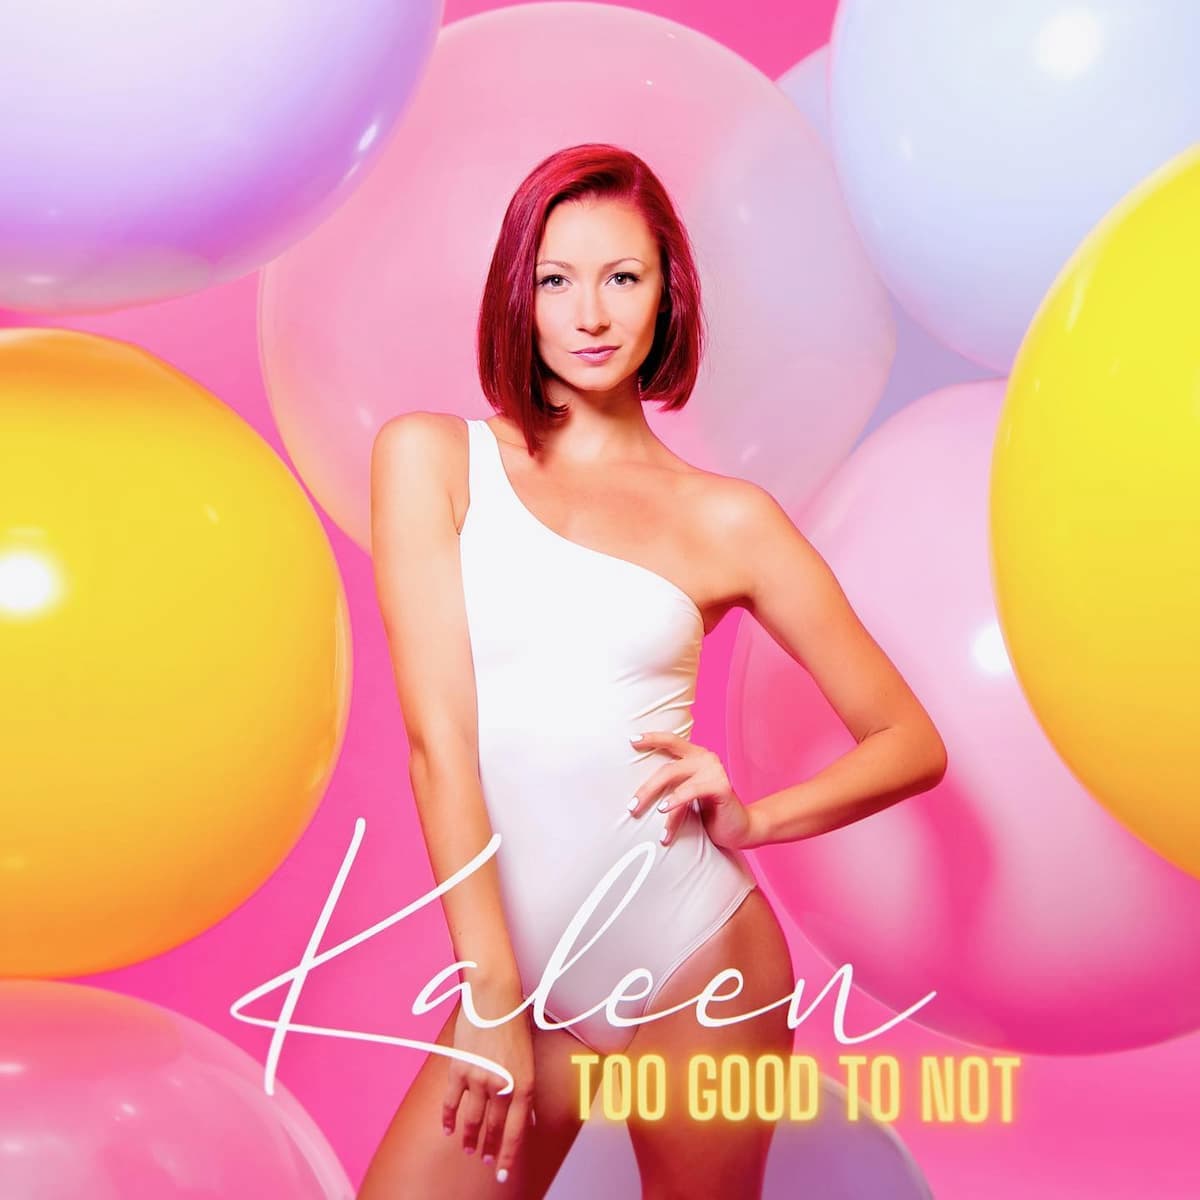 Erste Kaleen-Single Too Good to Not 2021 - Single-Cover